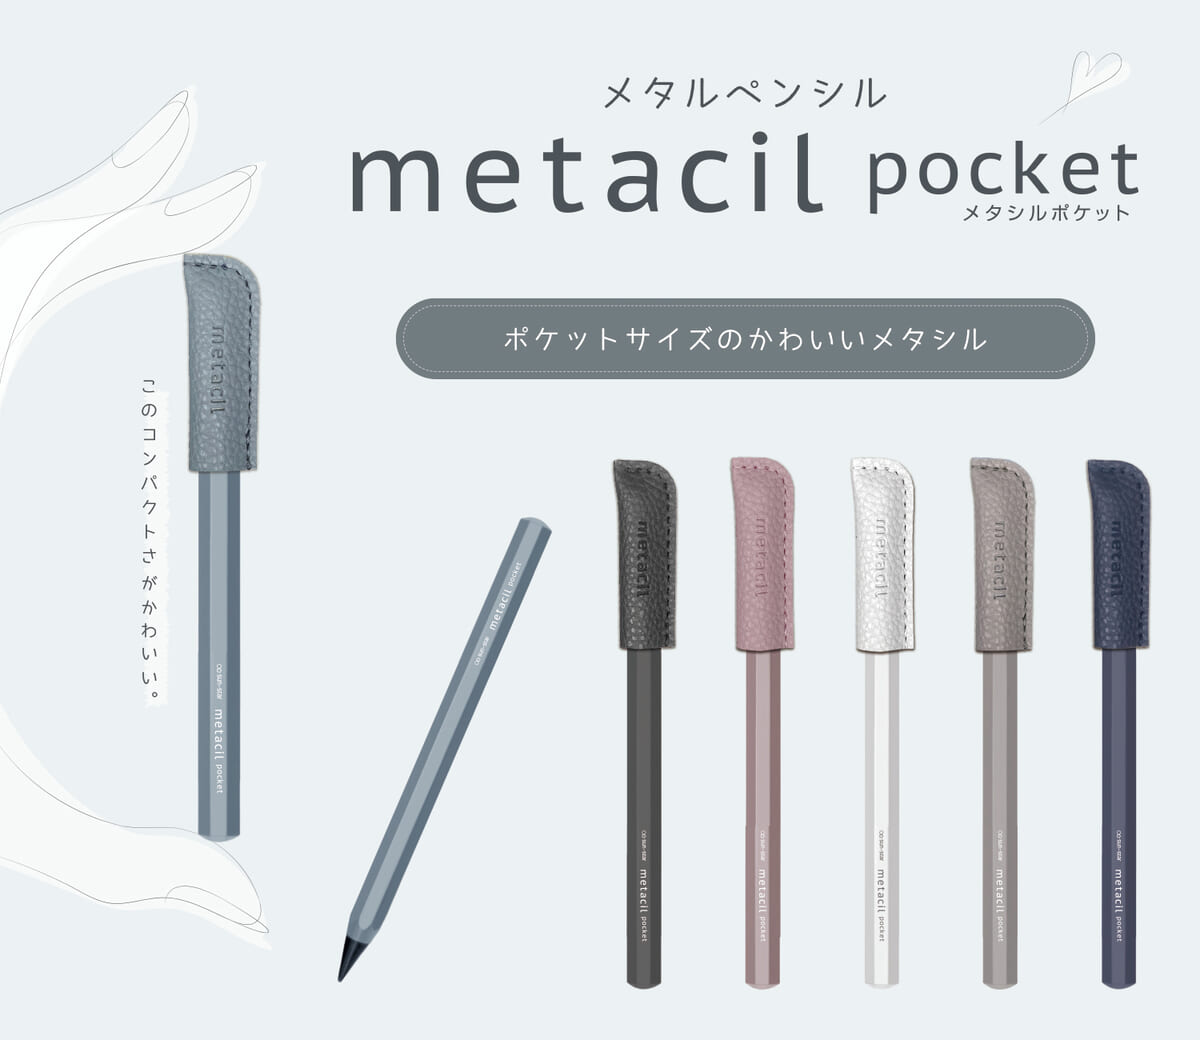 We offer Sun-star Metacil No-Sharpen Pencil - Metal Body - Red Sun-Star to  our loyal customers for a low cost and with an excellent level of service